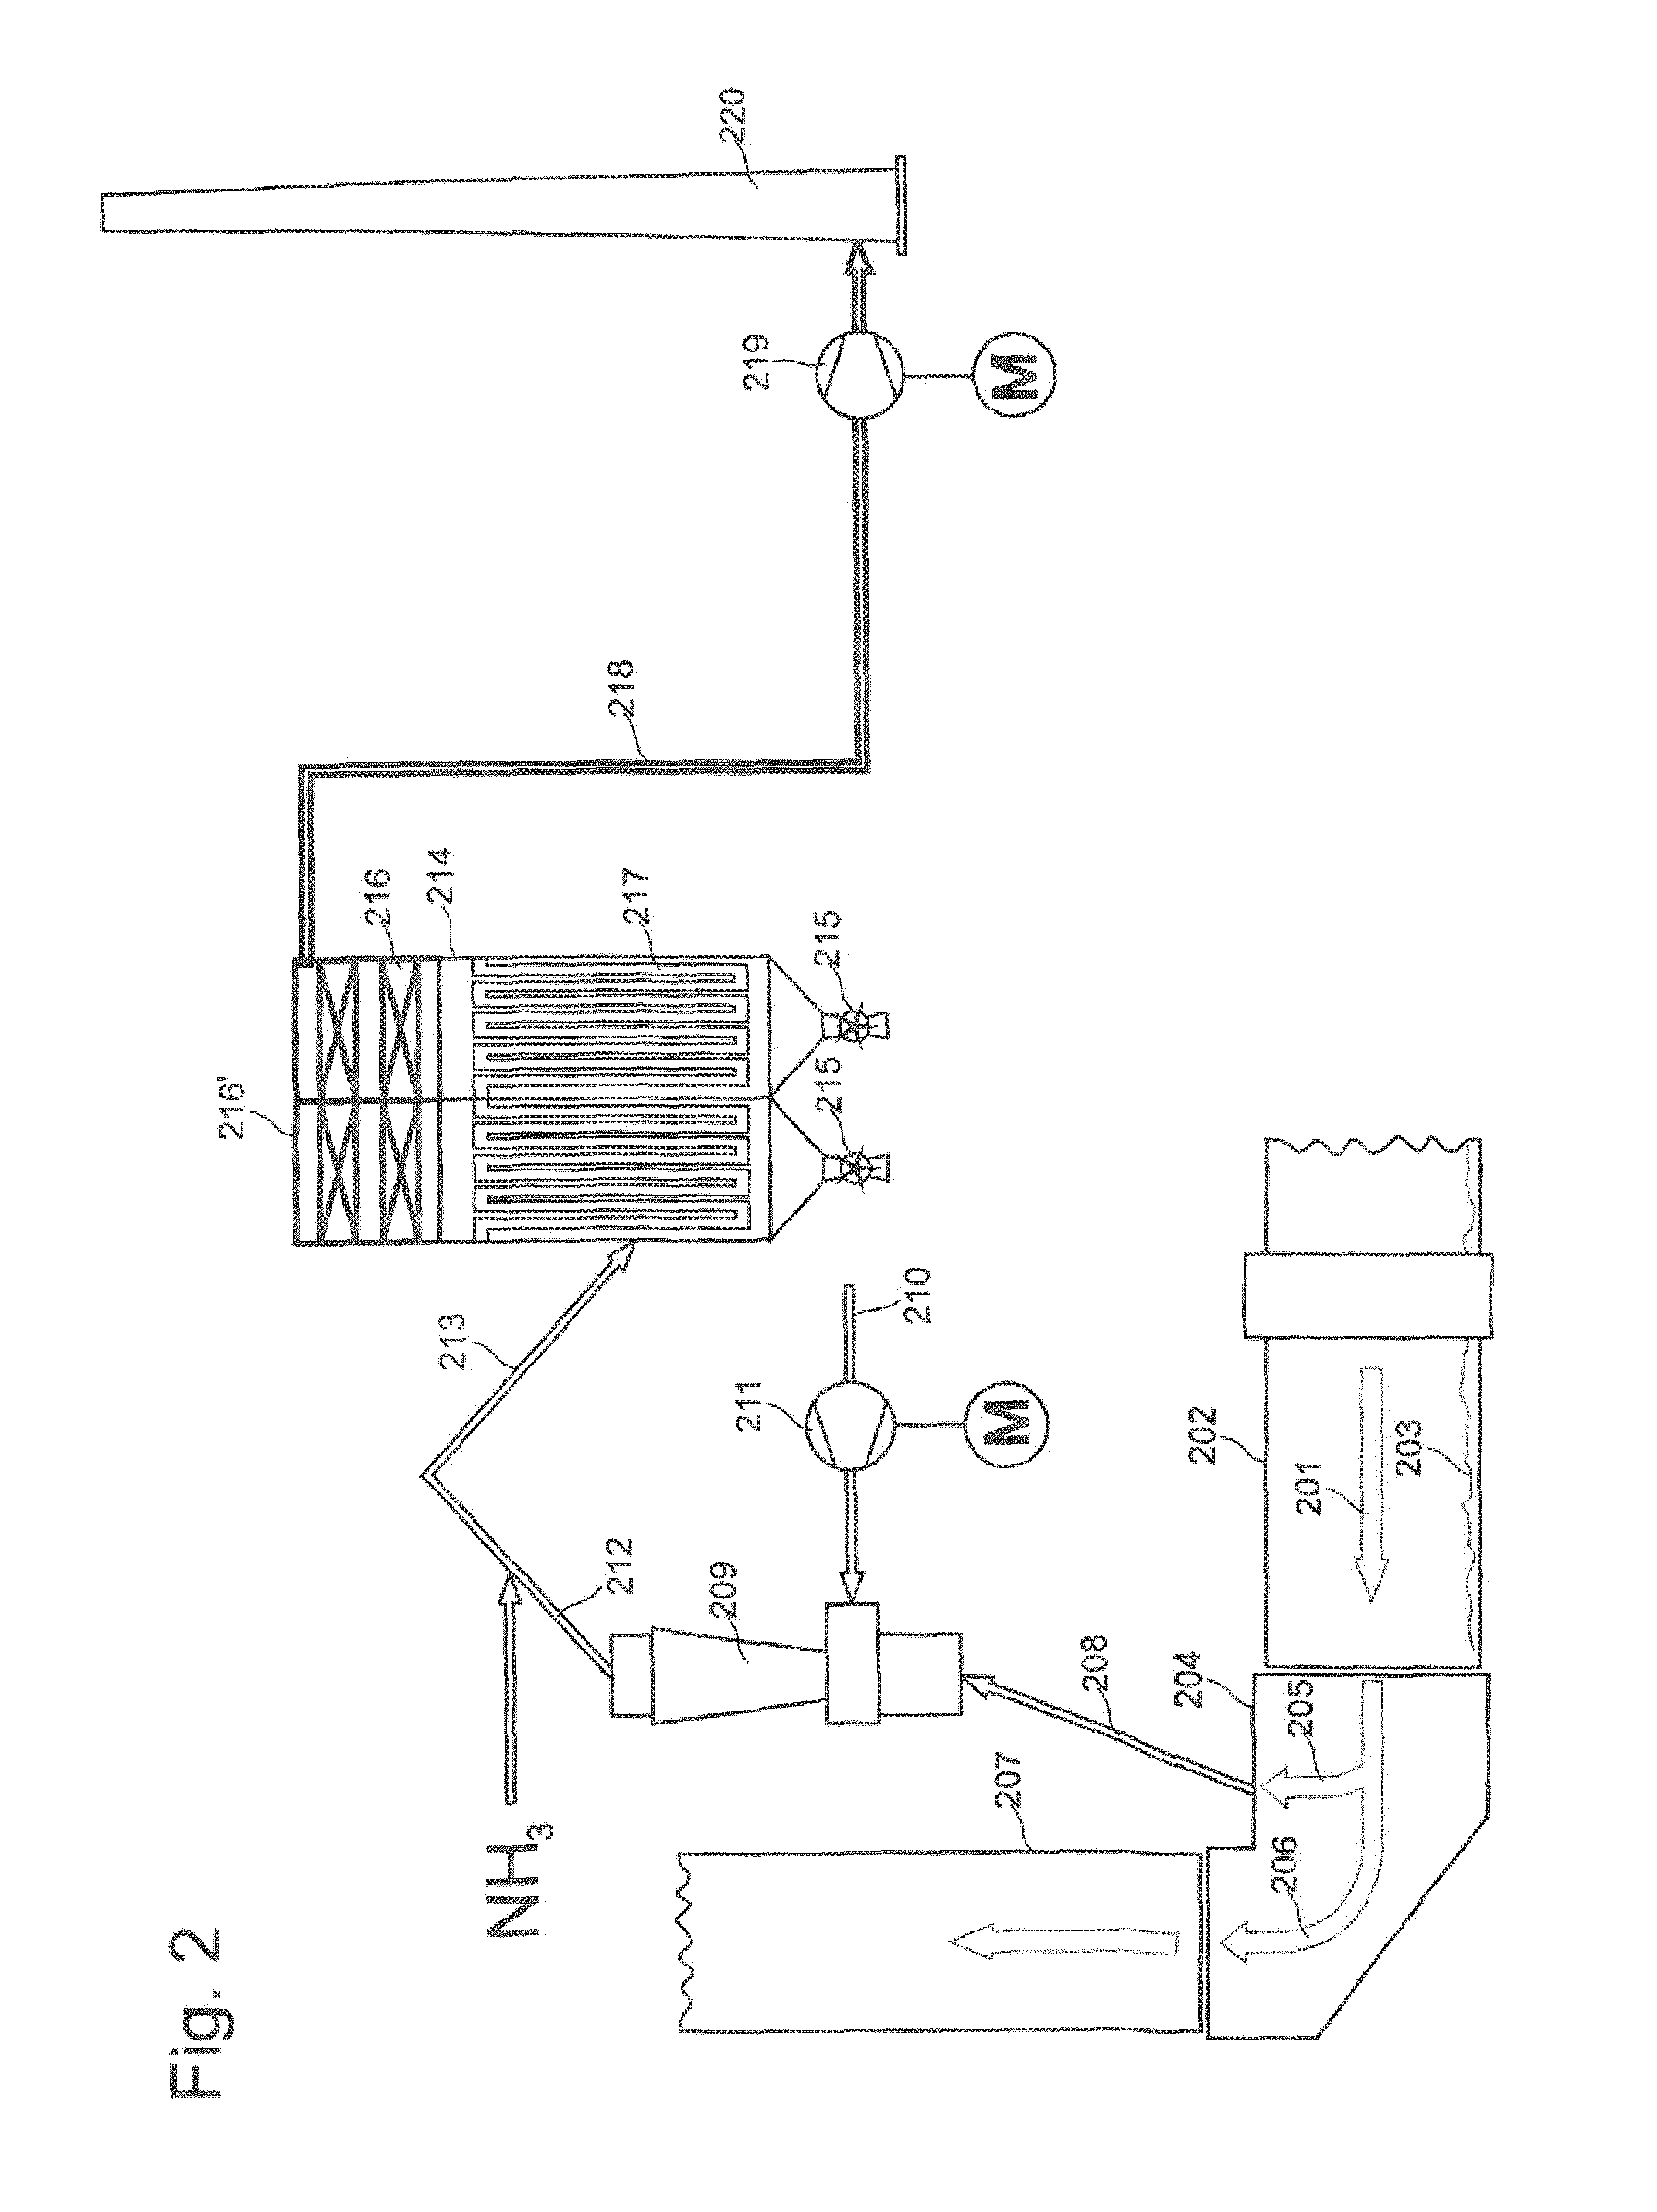 Method for denitrification of bypass exhaust gases in a plant for producing cement clinker